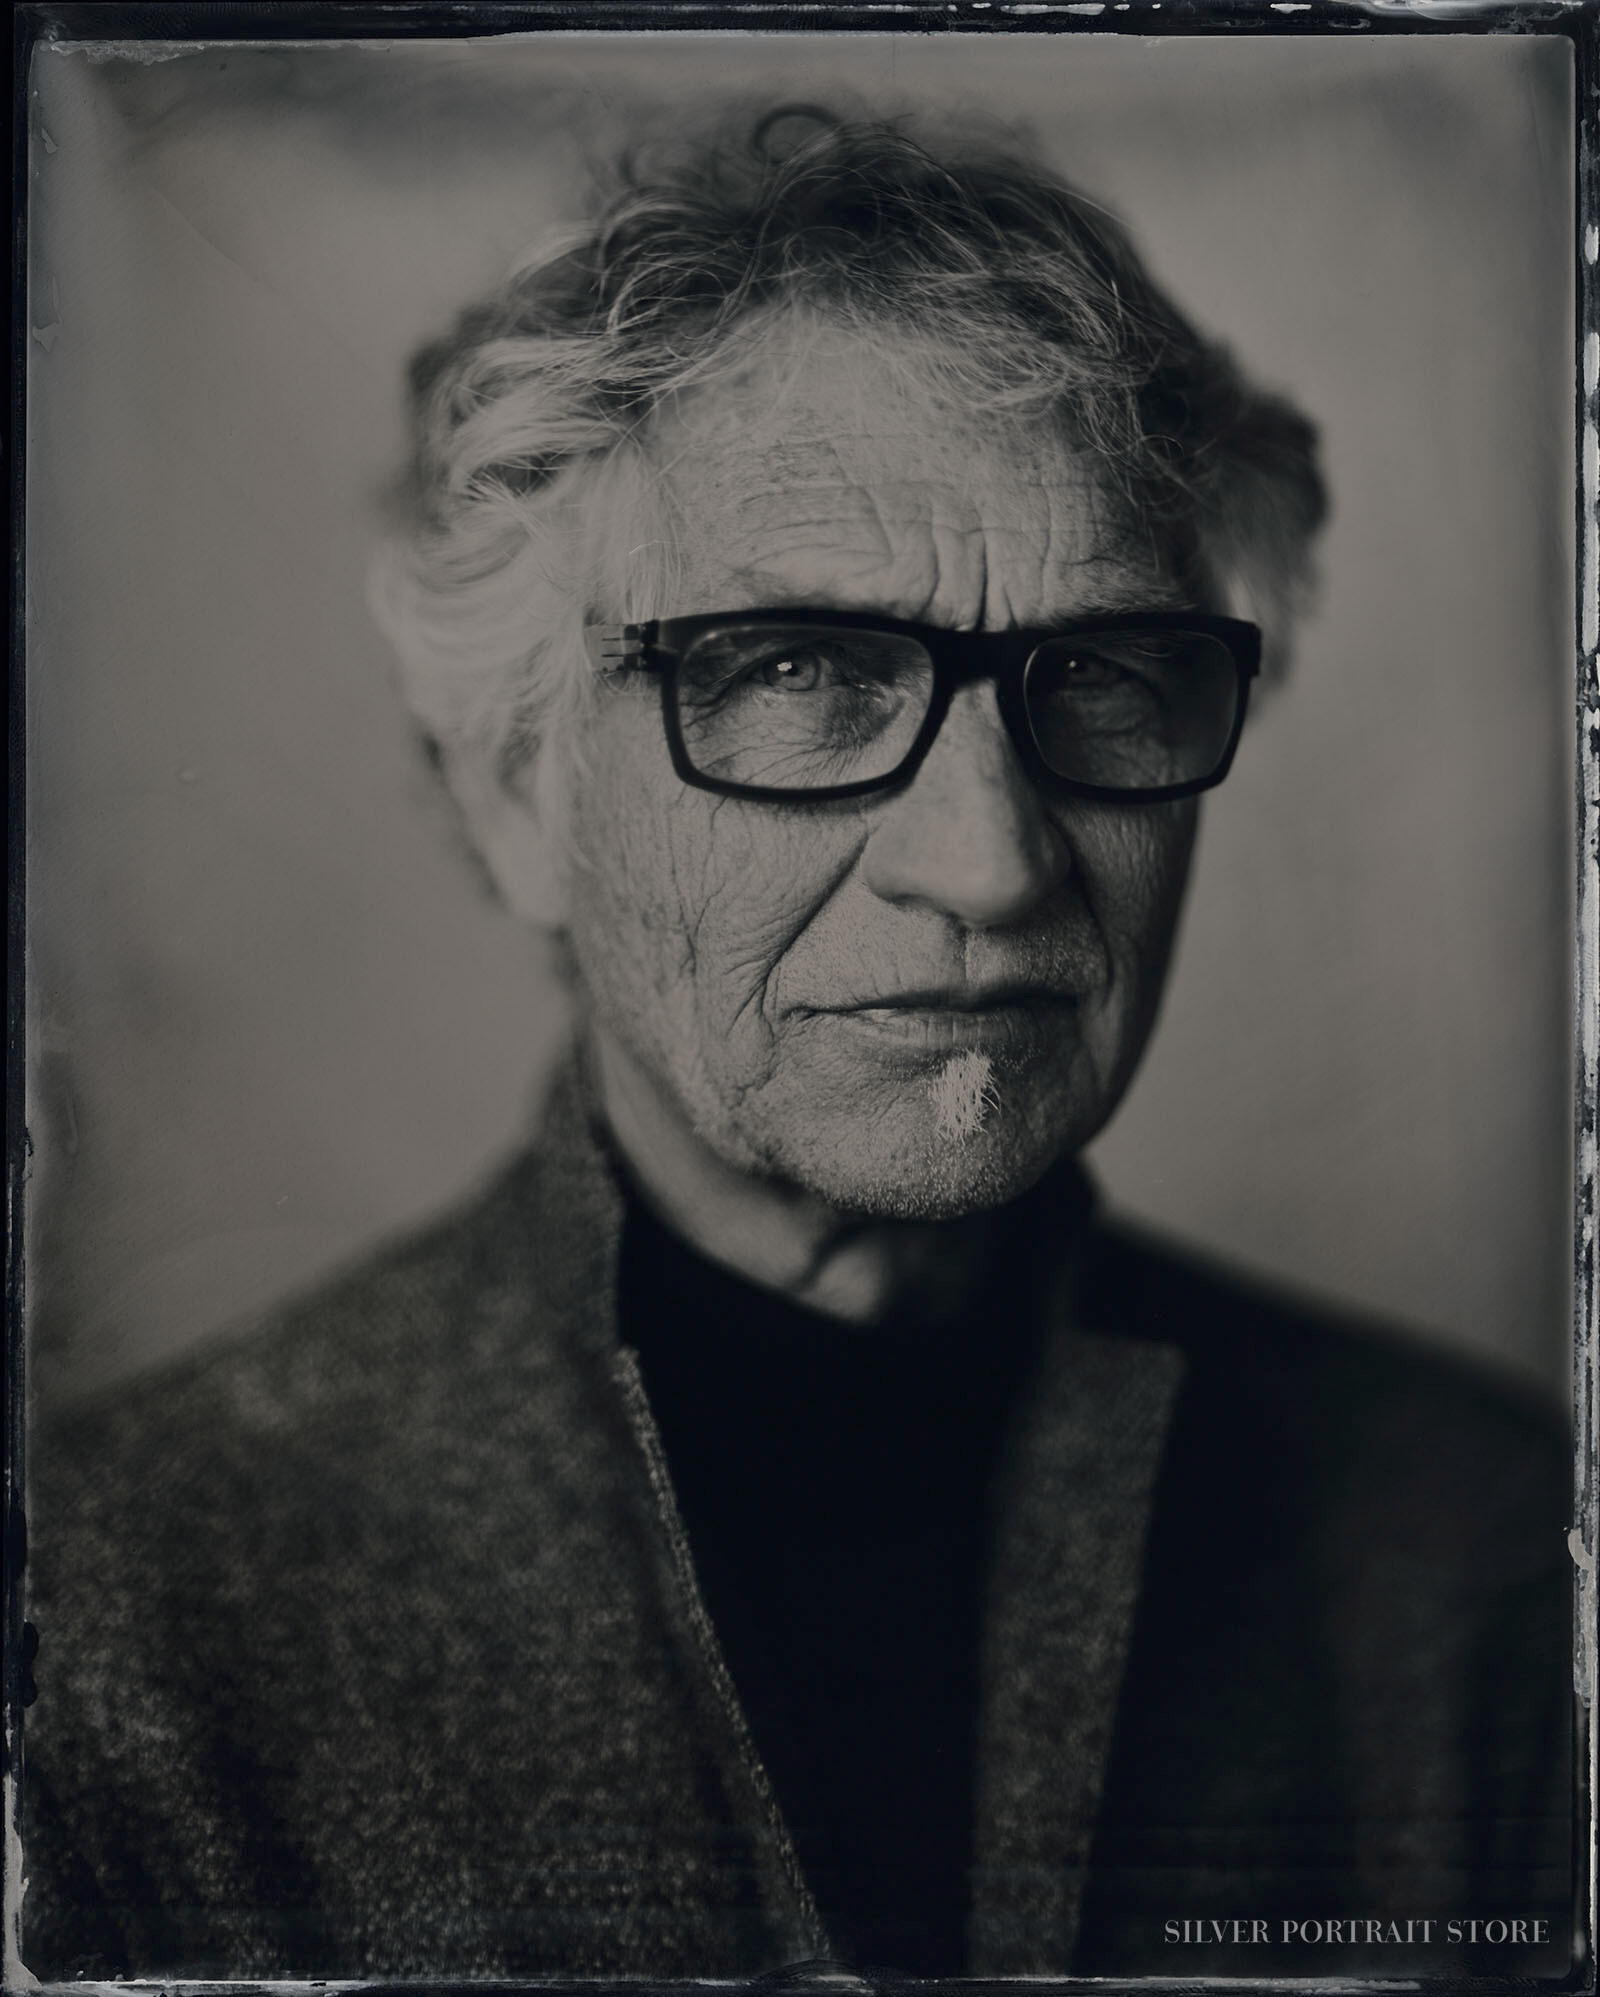 Gijs-Silver Portrait Store-Scan from Wet plate collodion-Tintype 20 x 25 cm. Lokatie PTA/Realisme Beurs.